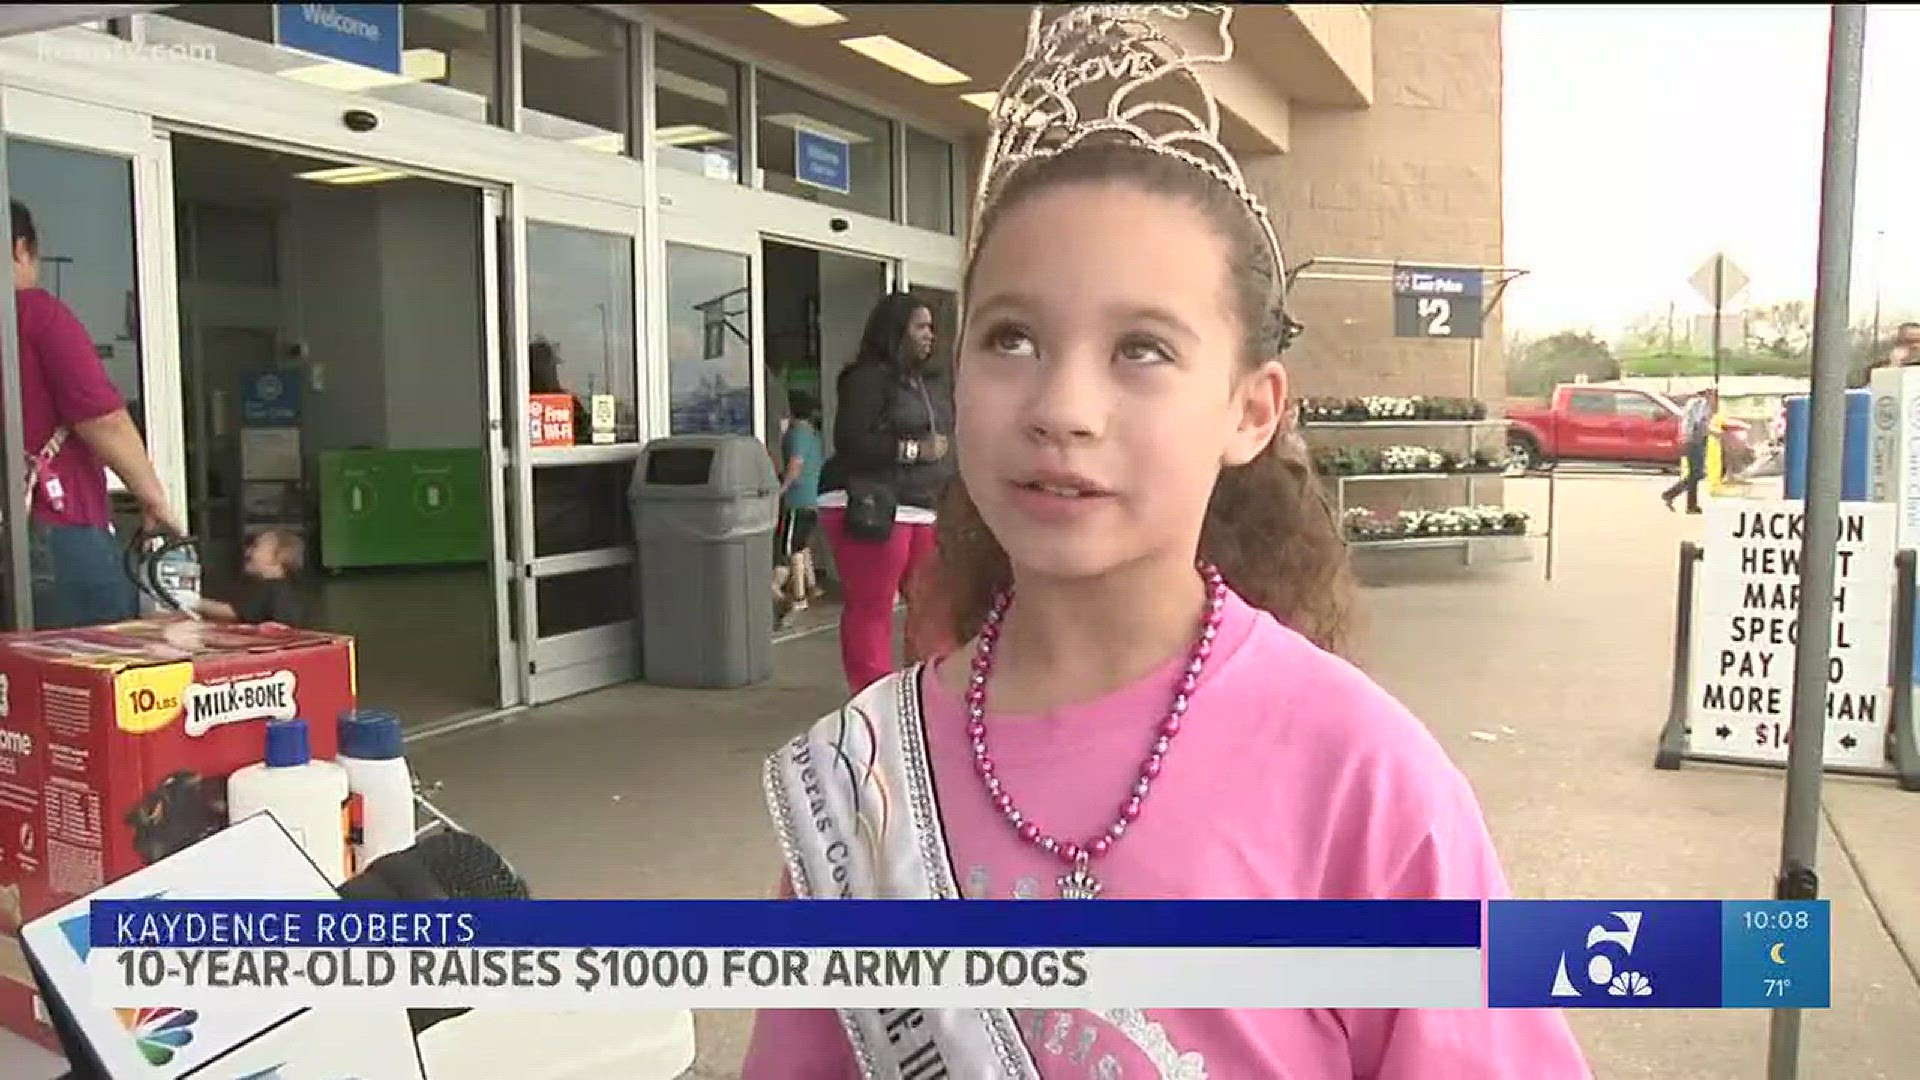 A 10 year-old girl collects donations for military service dogs.